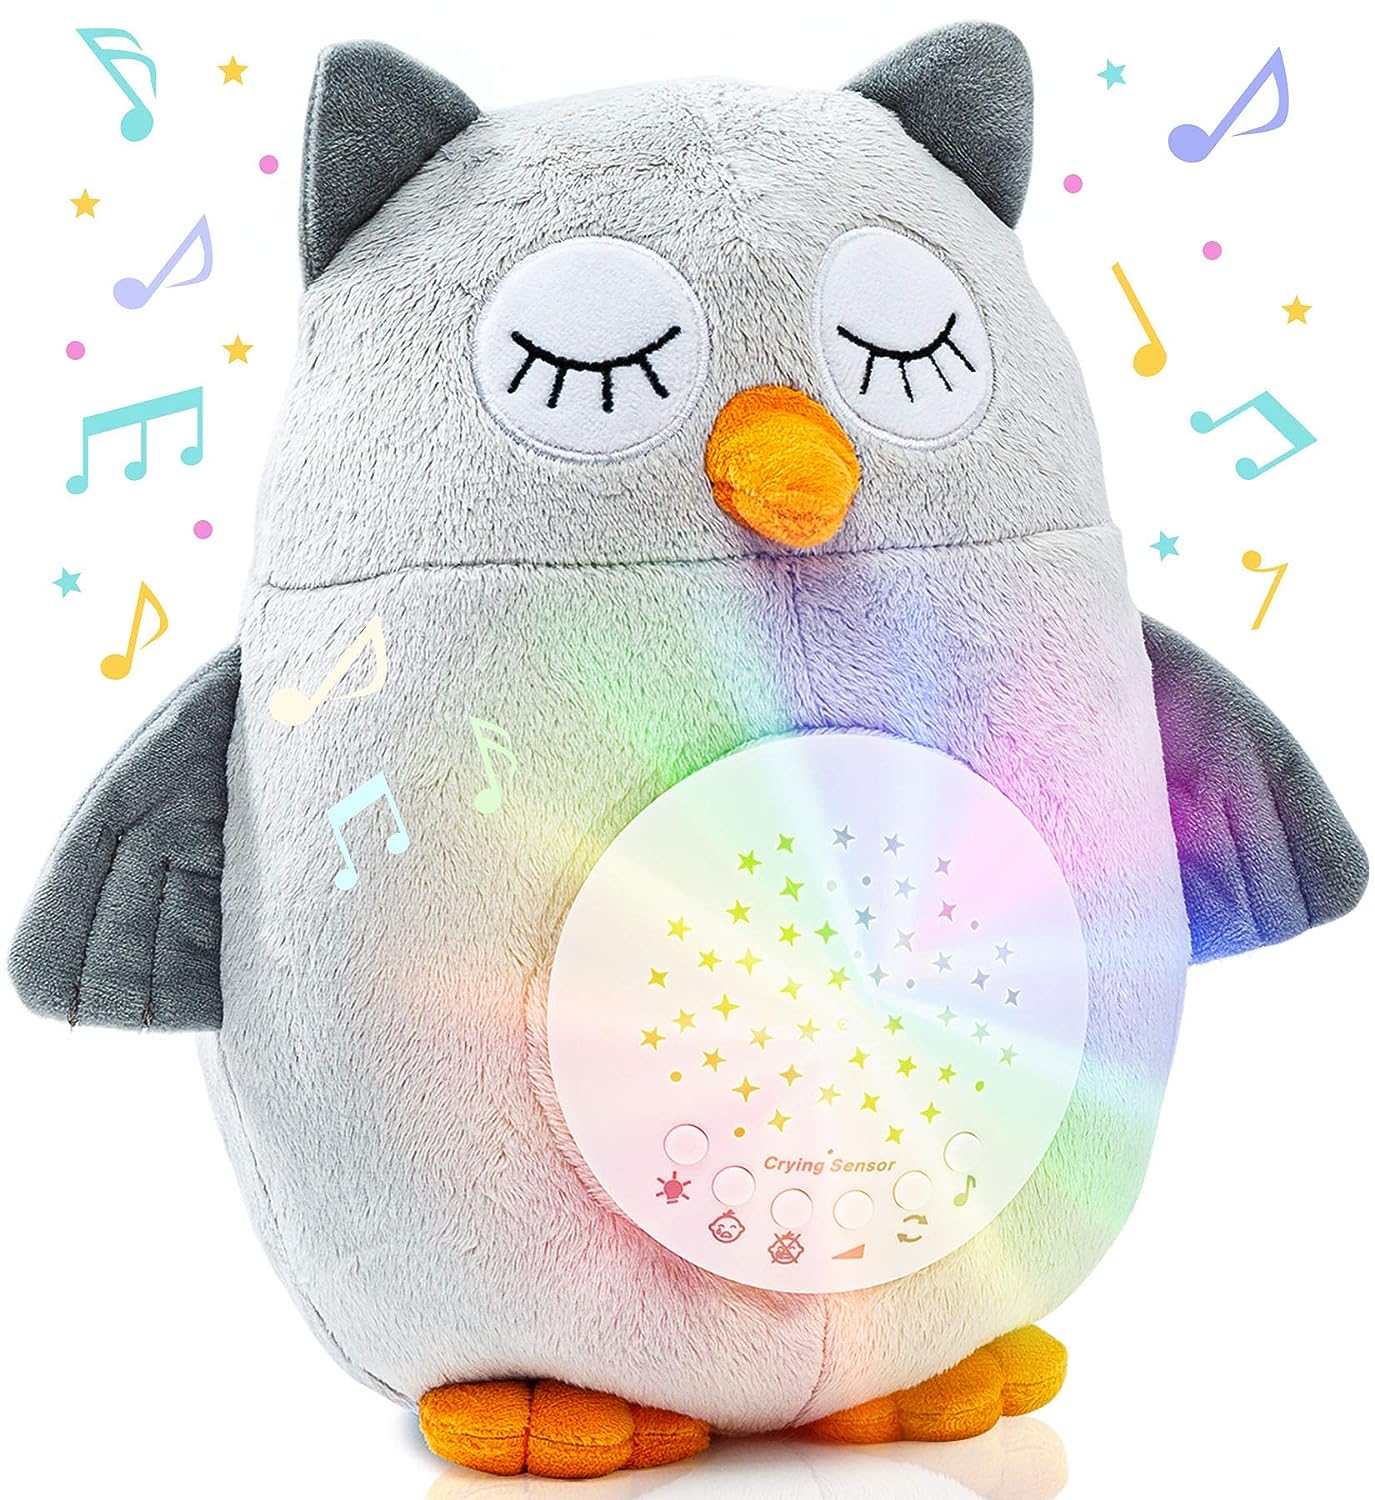 New Baby Soother Cry Activated Toy and Sound Machine - Baby Plush Owl